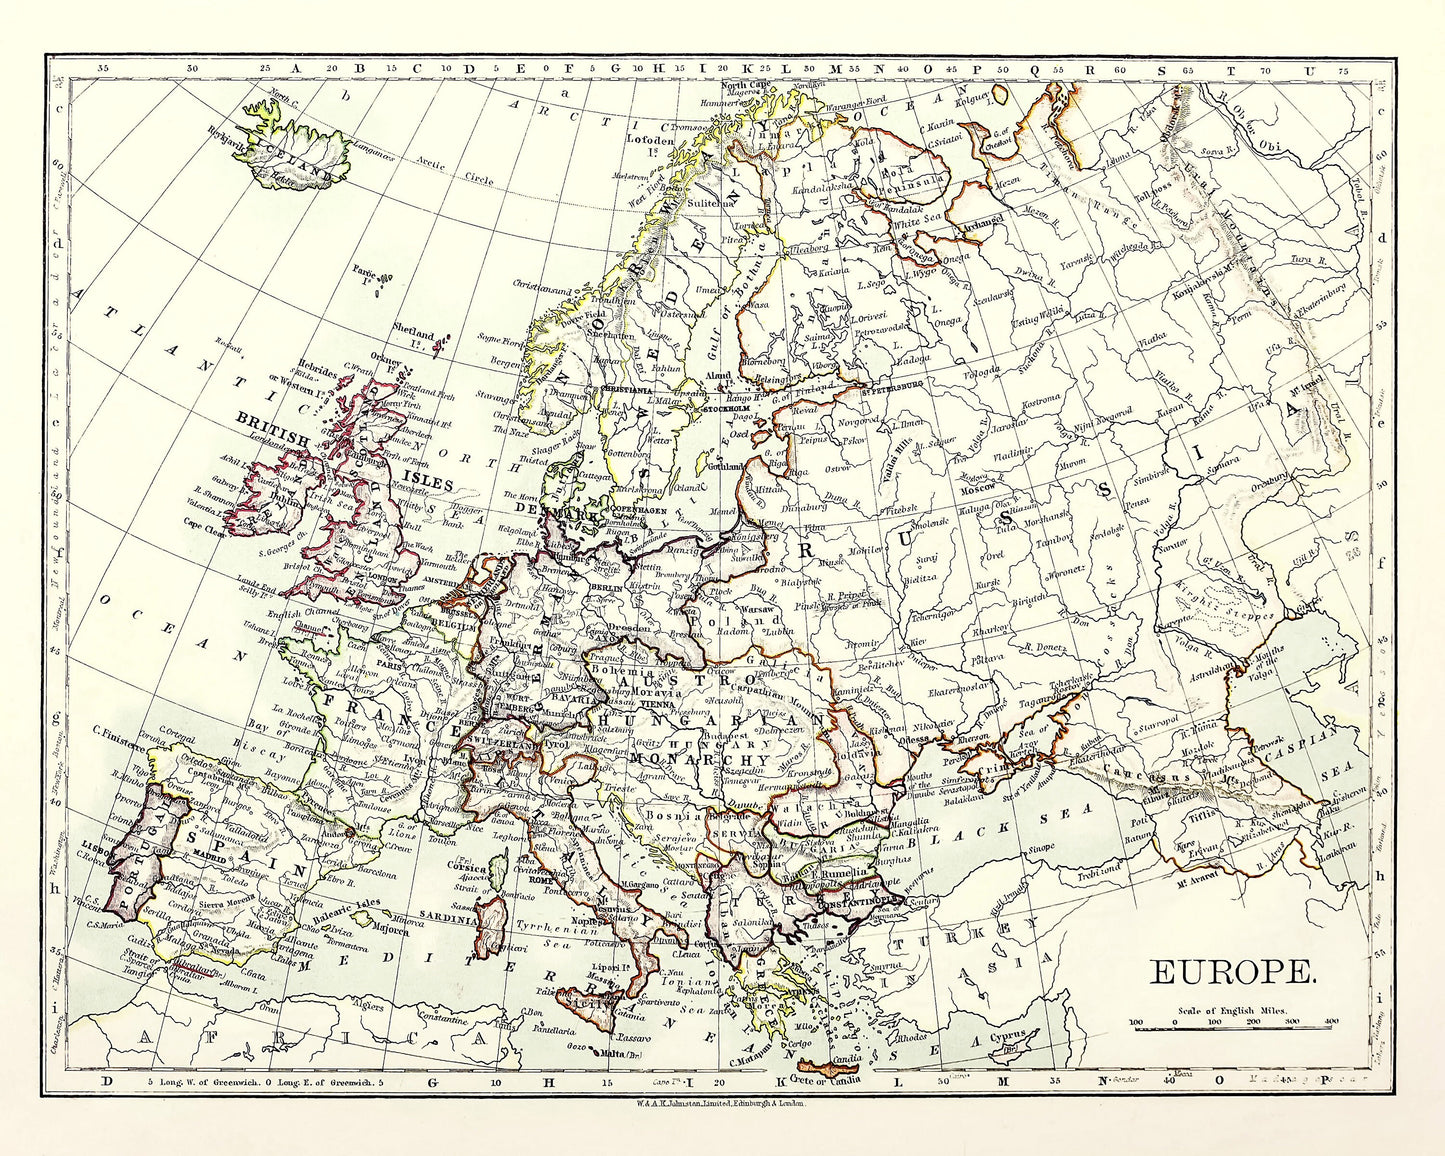 The World Wide Atlas of Modern Geography Europe [27 Images]